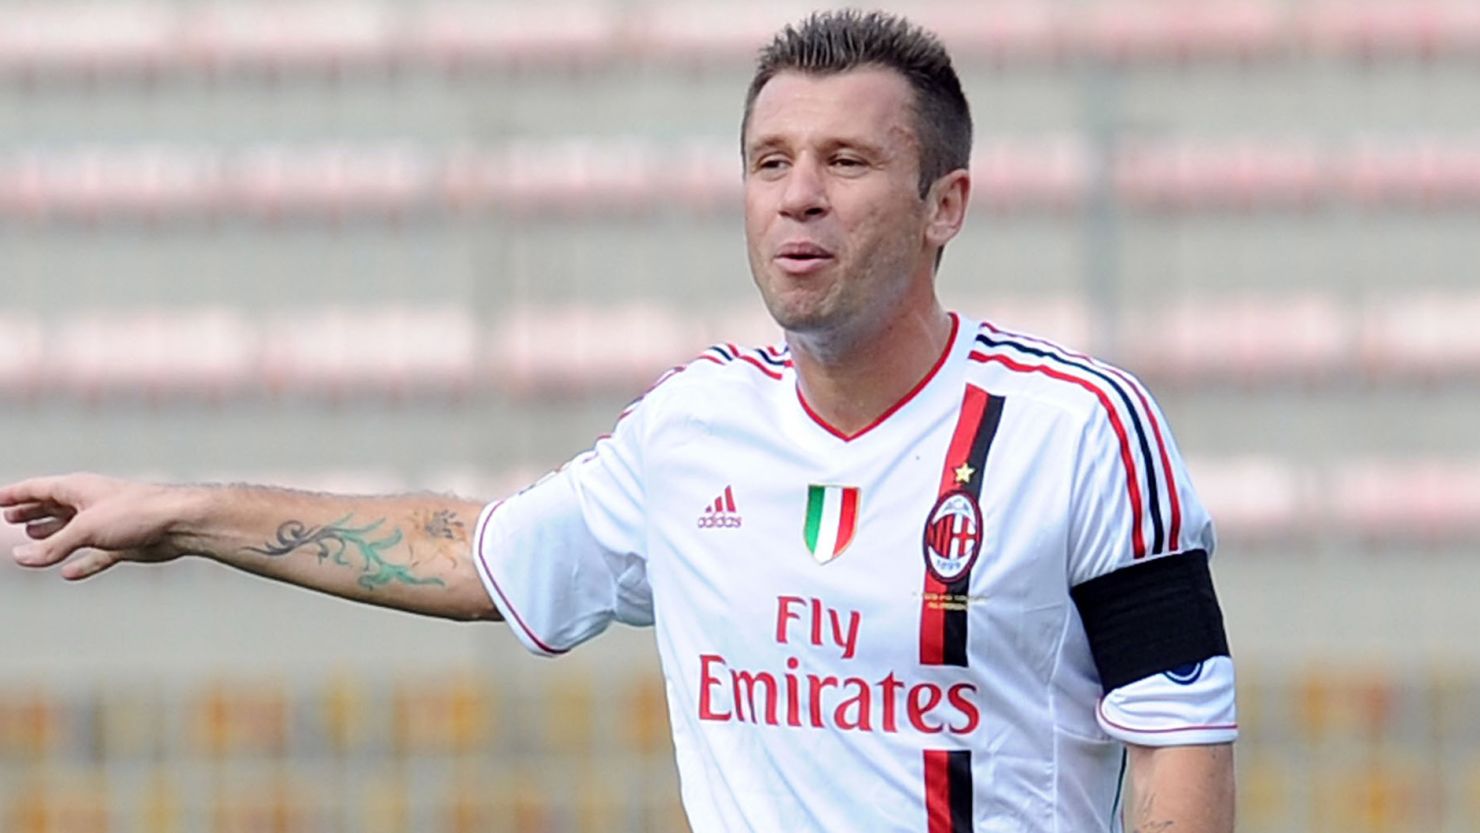 Italy striker Antonio Cassano joined AC Milan in January 2011 and has scored two Serie A goals so far this season.